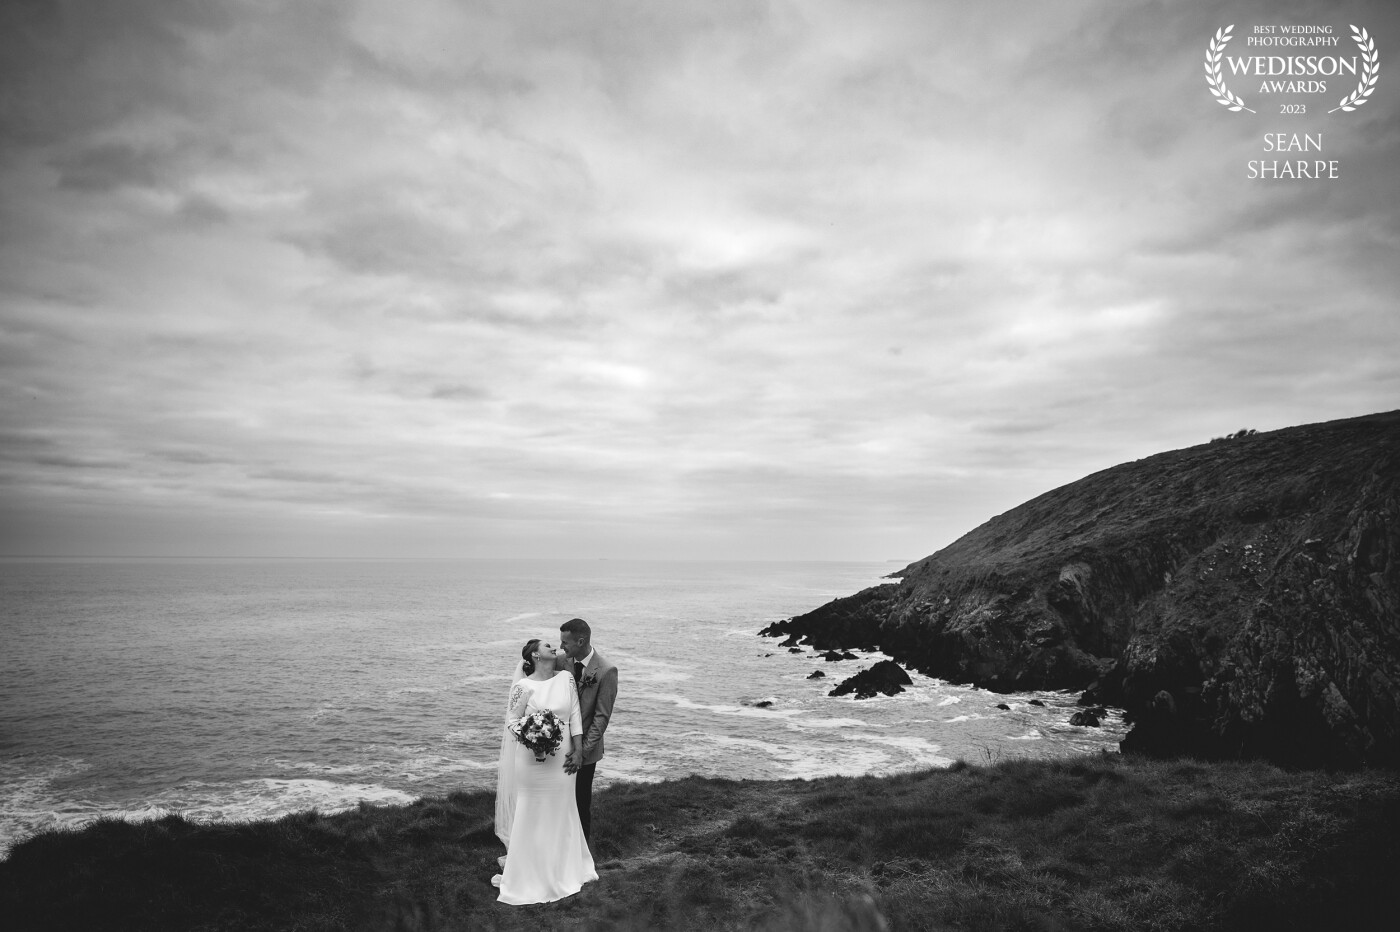 Sinead and Leonard at the beautiful cliffs of Ballycotton, Cork. Love this shot and its simplicity and mood. Always love shooting at this spot!